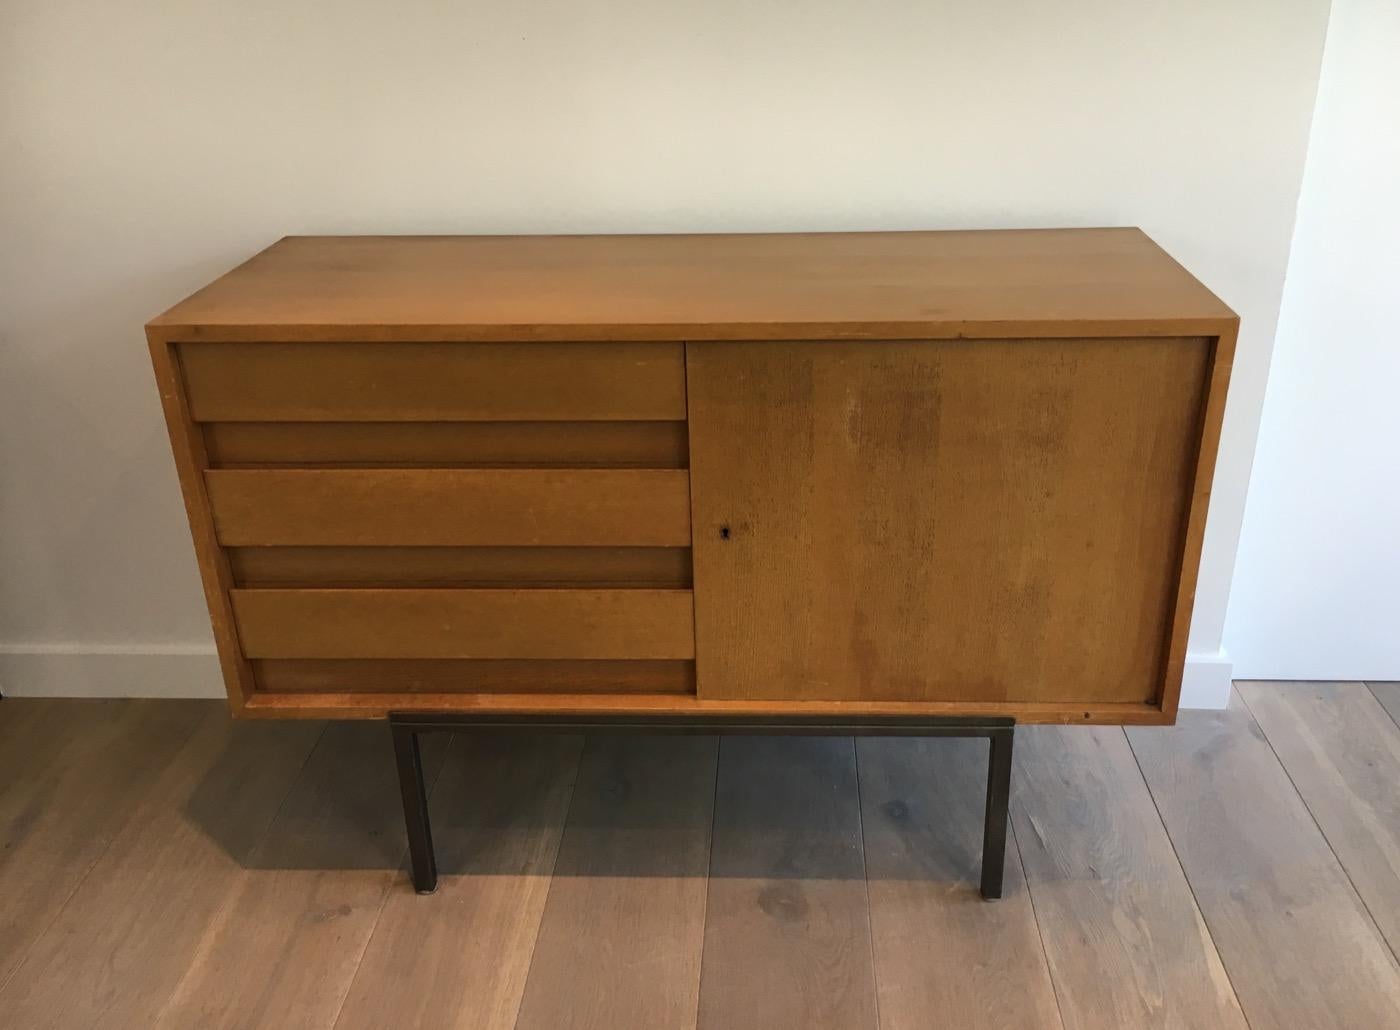 Wooden sideboard with one door and 3 drawers on a modernist steel base, circa 1950.